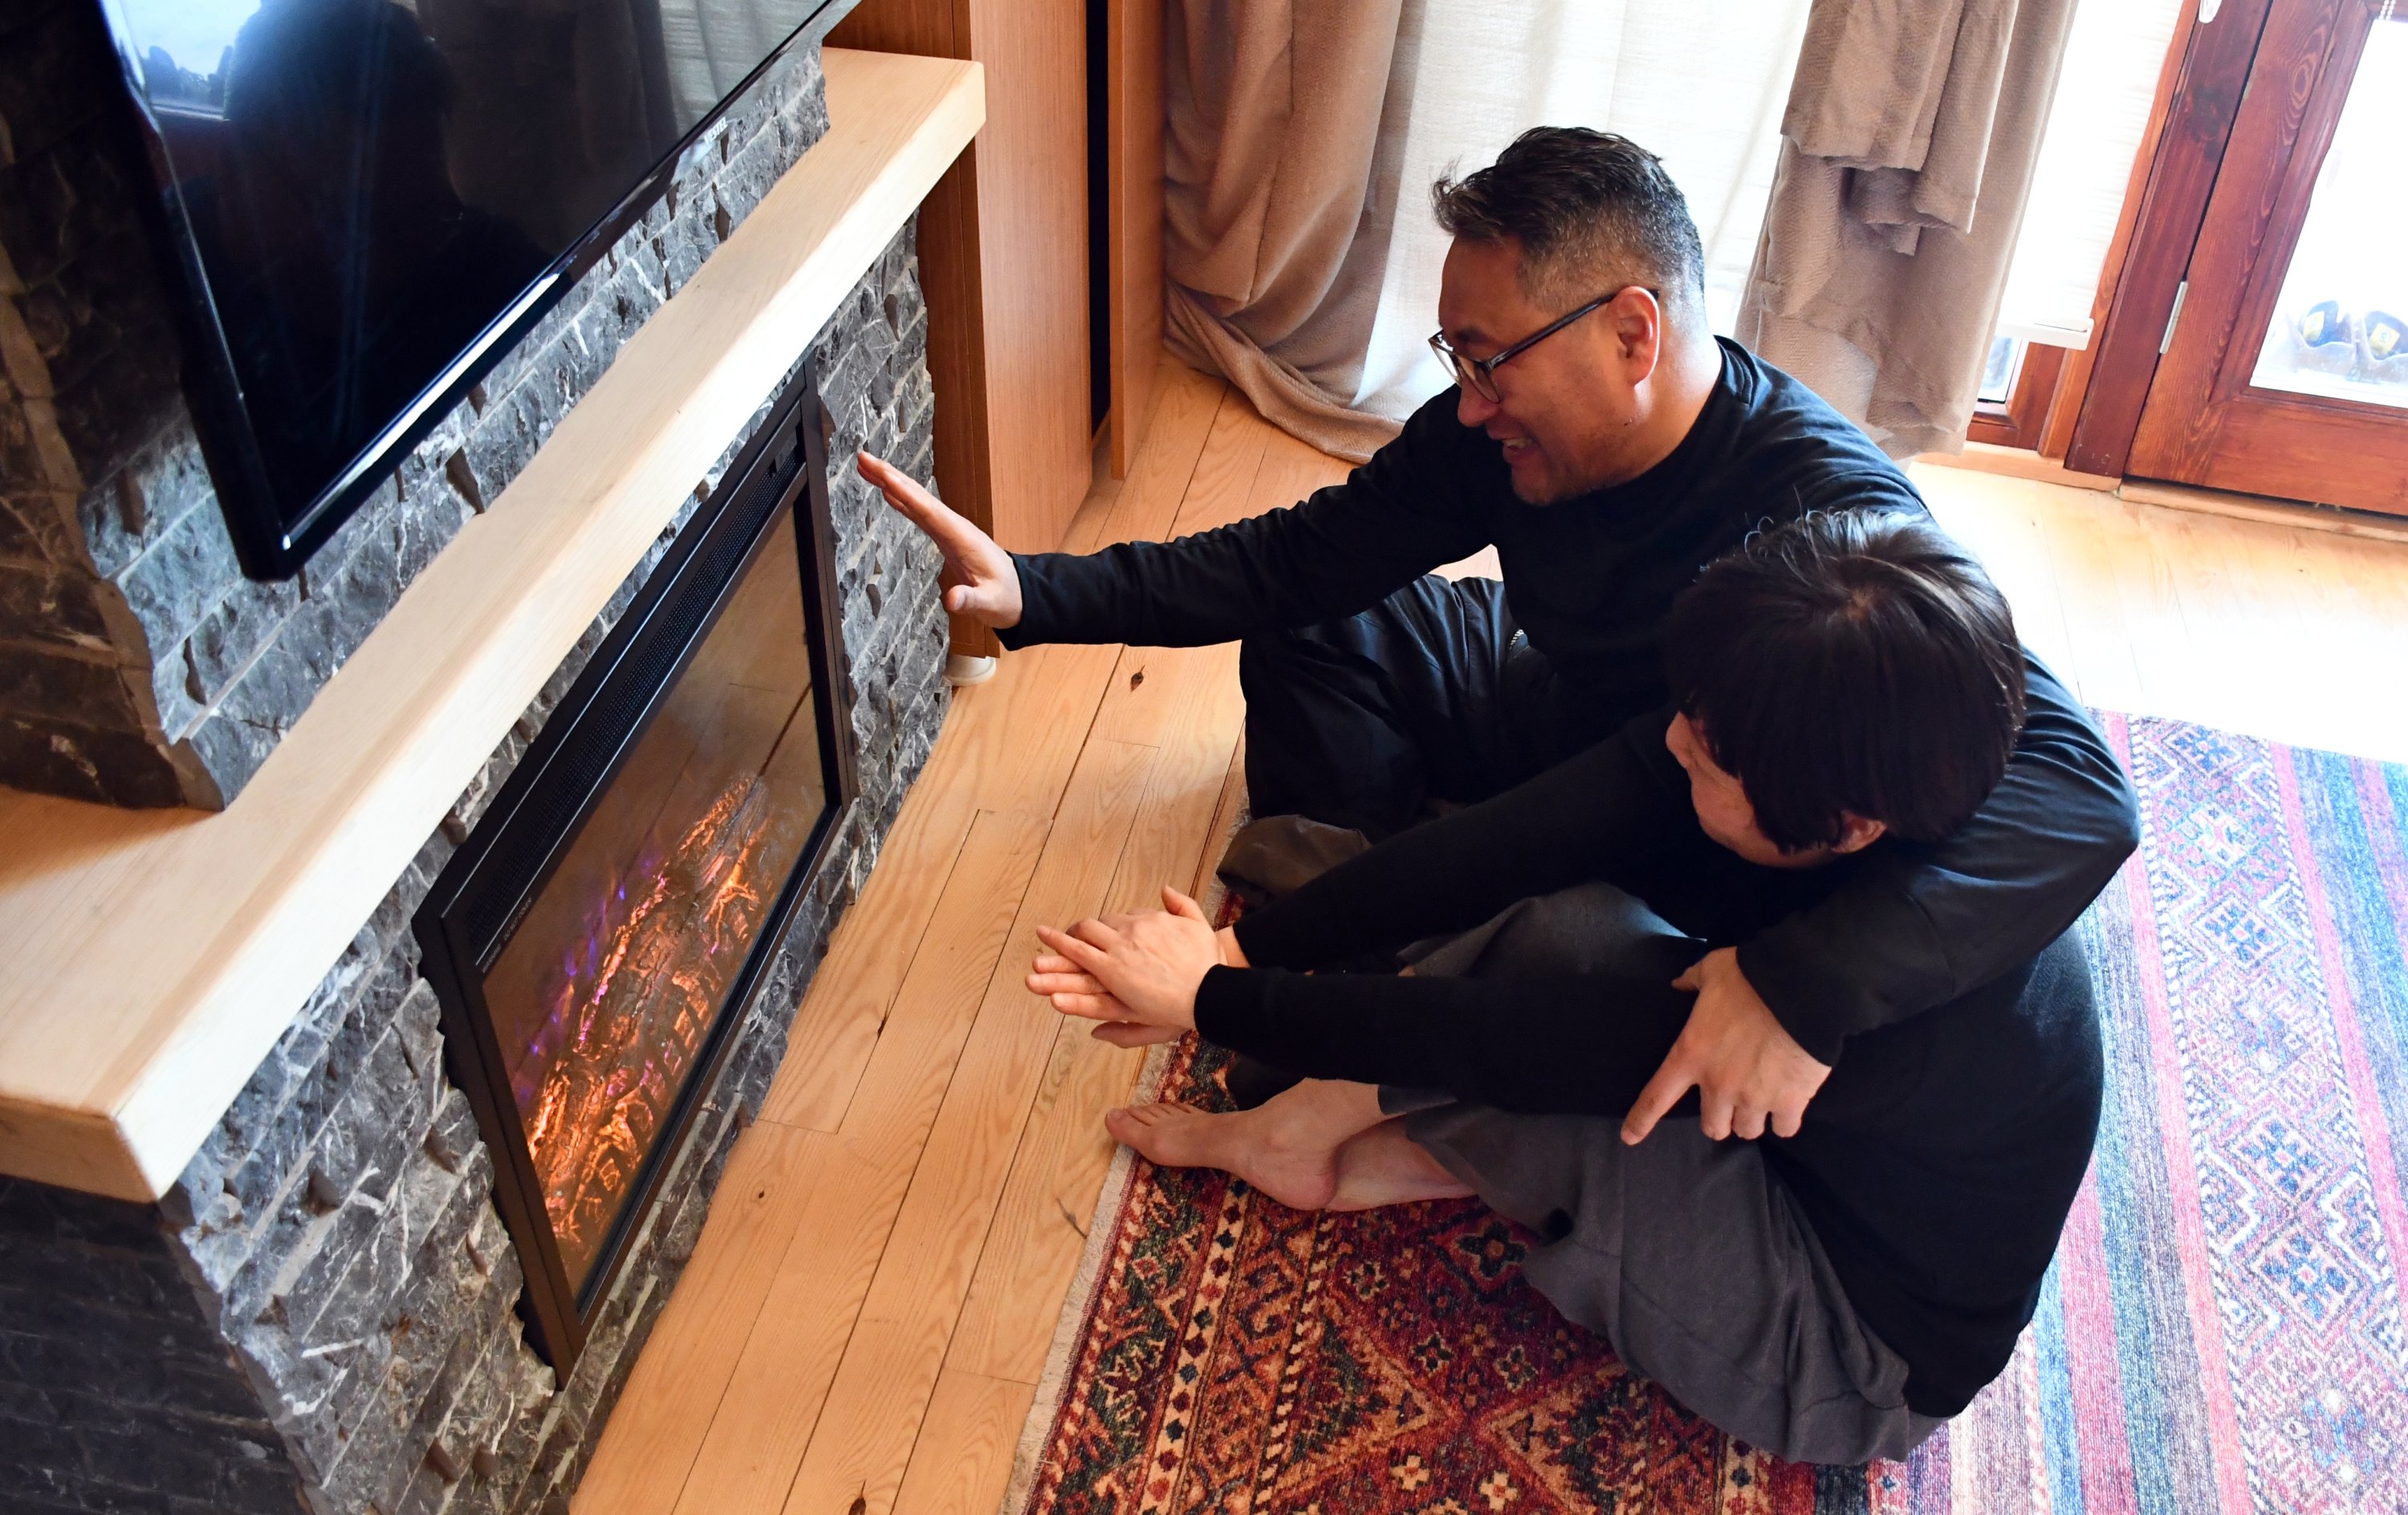 South Korean guest Back Myoungsu and his family guest sit in front of the fireplace in one of the self-contained bungalows at the Yıldız Mountain Winter Sports and Tourism Center, Sivas, central Turkey, Feb. 22, 2022. (AA Photo)